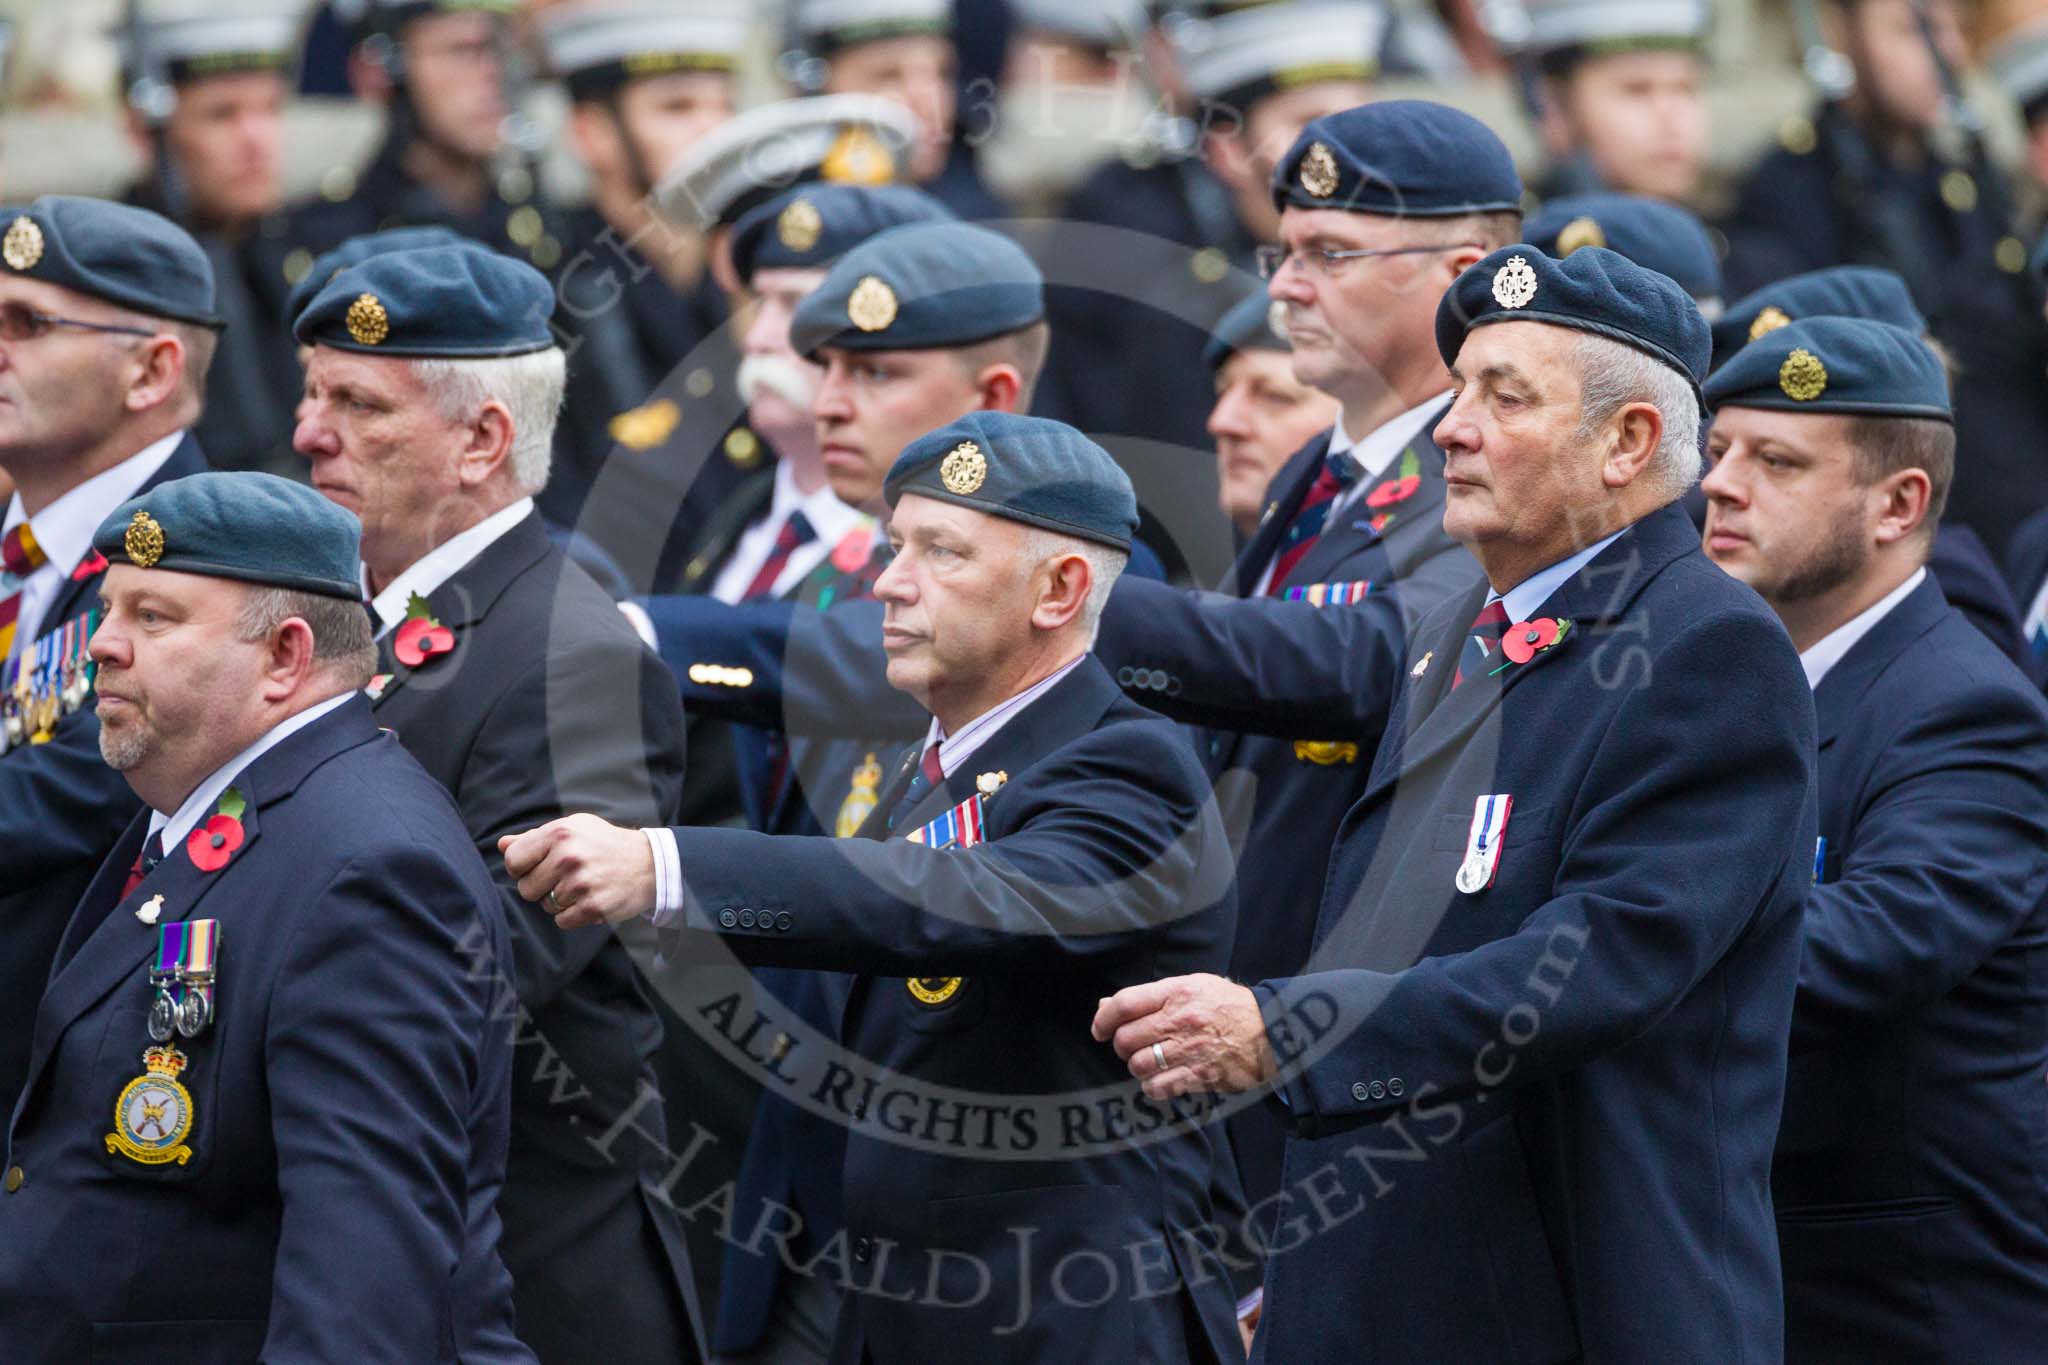 Remembrance Sunday at the Cenotaph 2015: C2, Royal Air Force Regiment Association.
Cenotaph, Whitehall, London SW1,
London,
Greater London,
United Kingdom,
on 08 November 2015 at 11:47, image #418